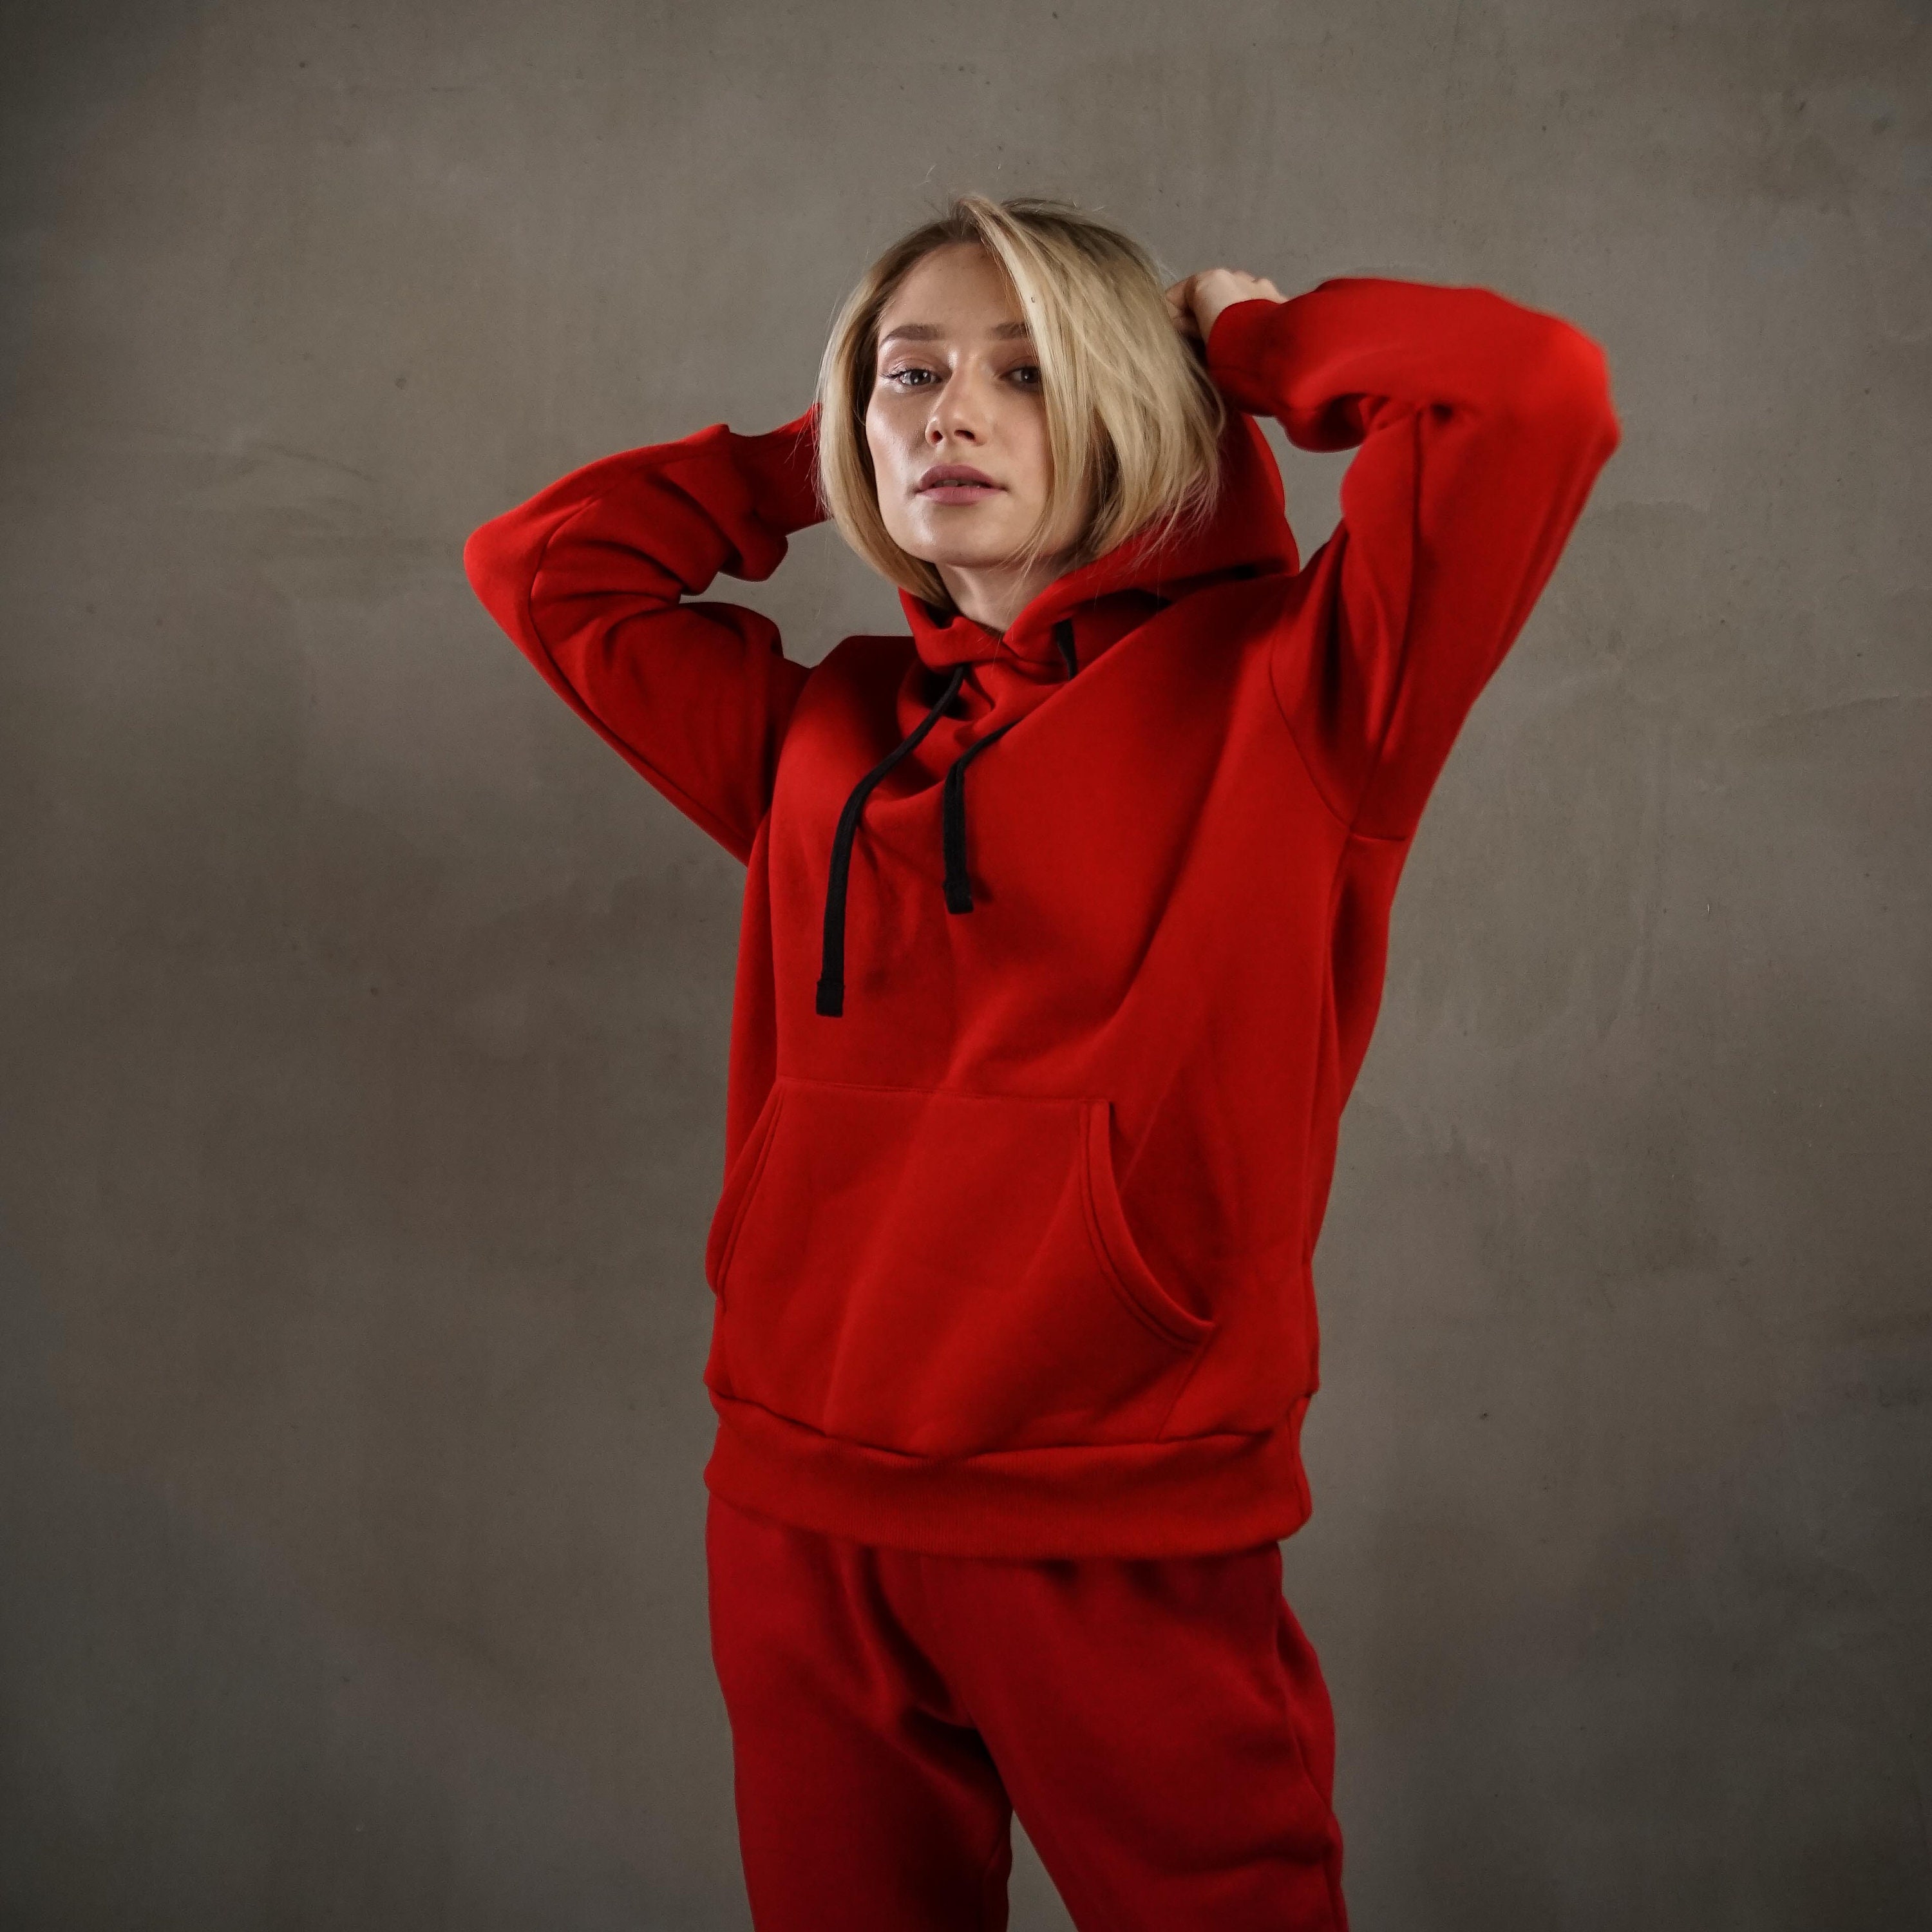 Bore festspil Han Red Hoodie and Joggers Set for Woman Oversized Hoodie - Etsy